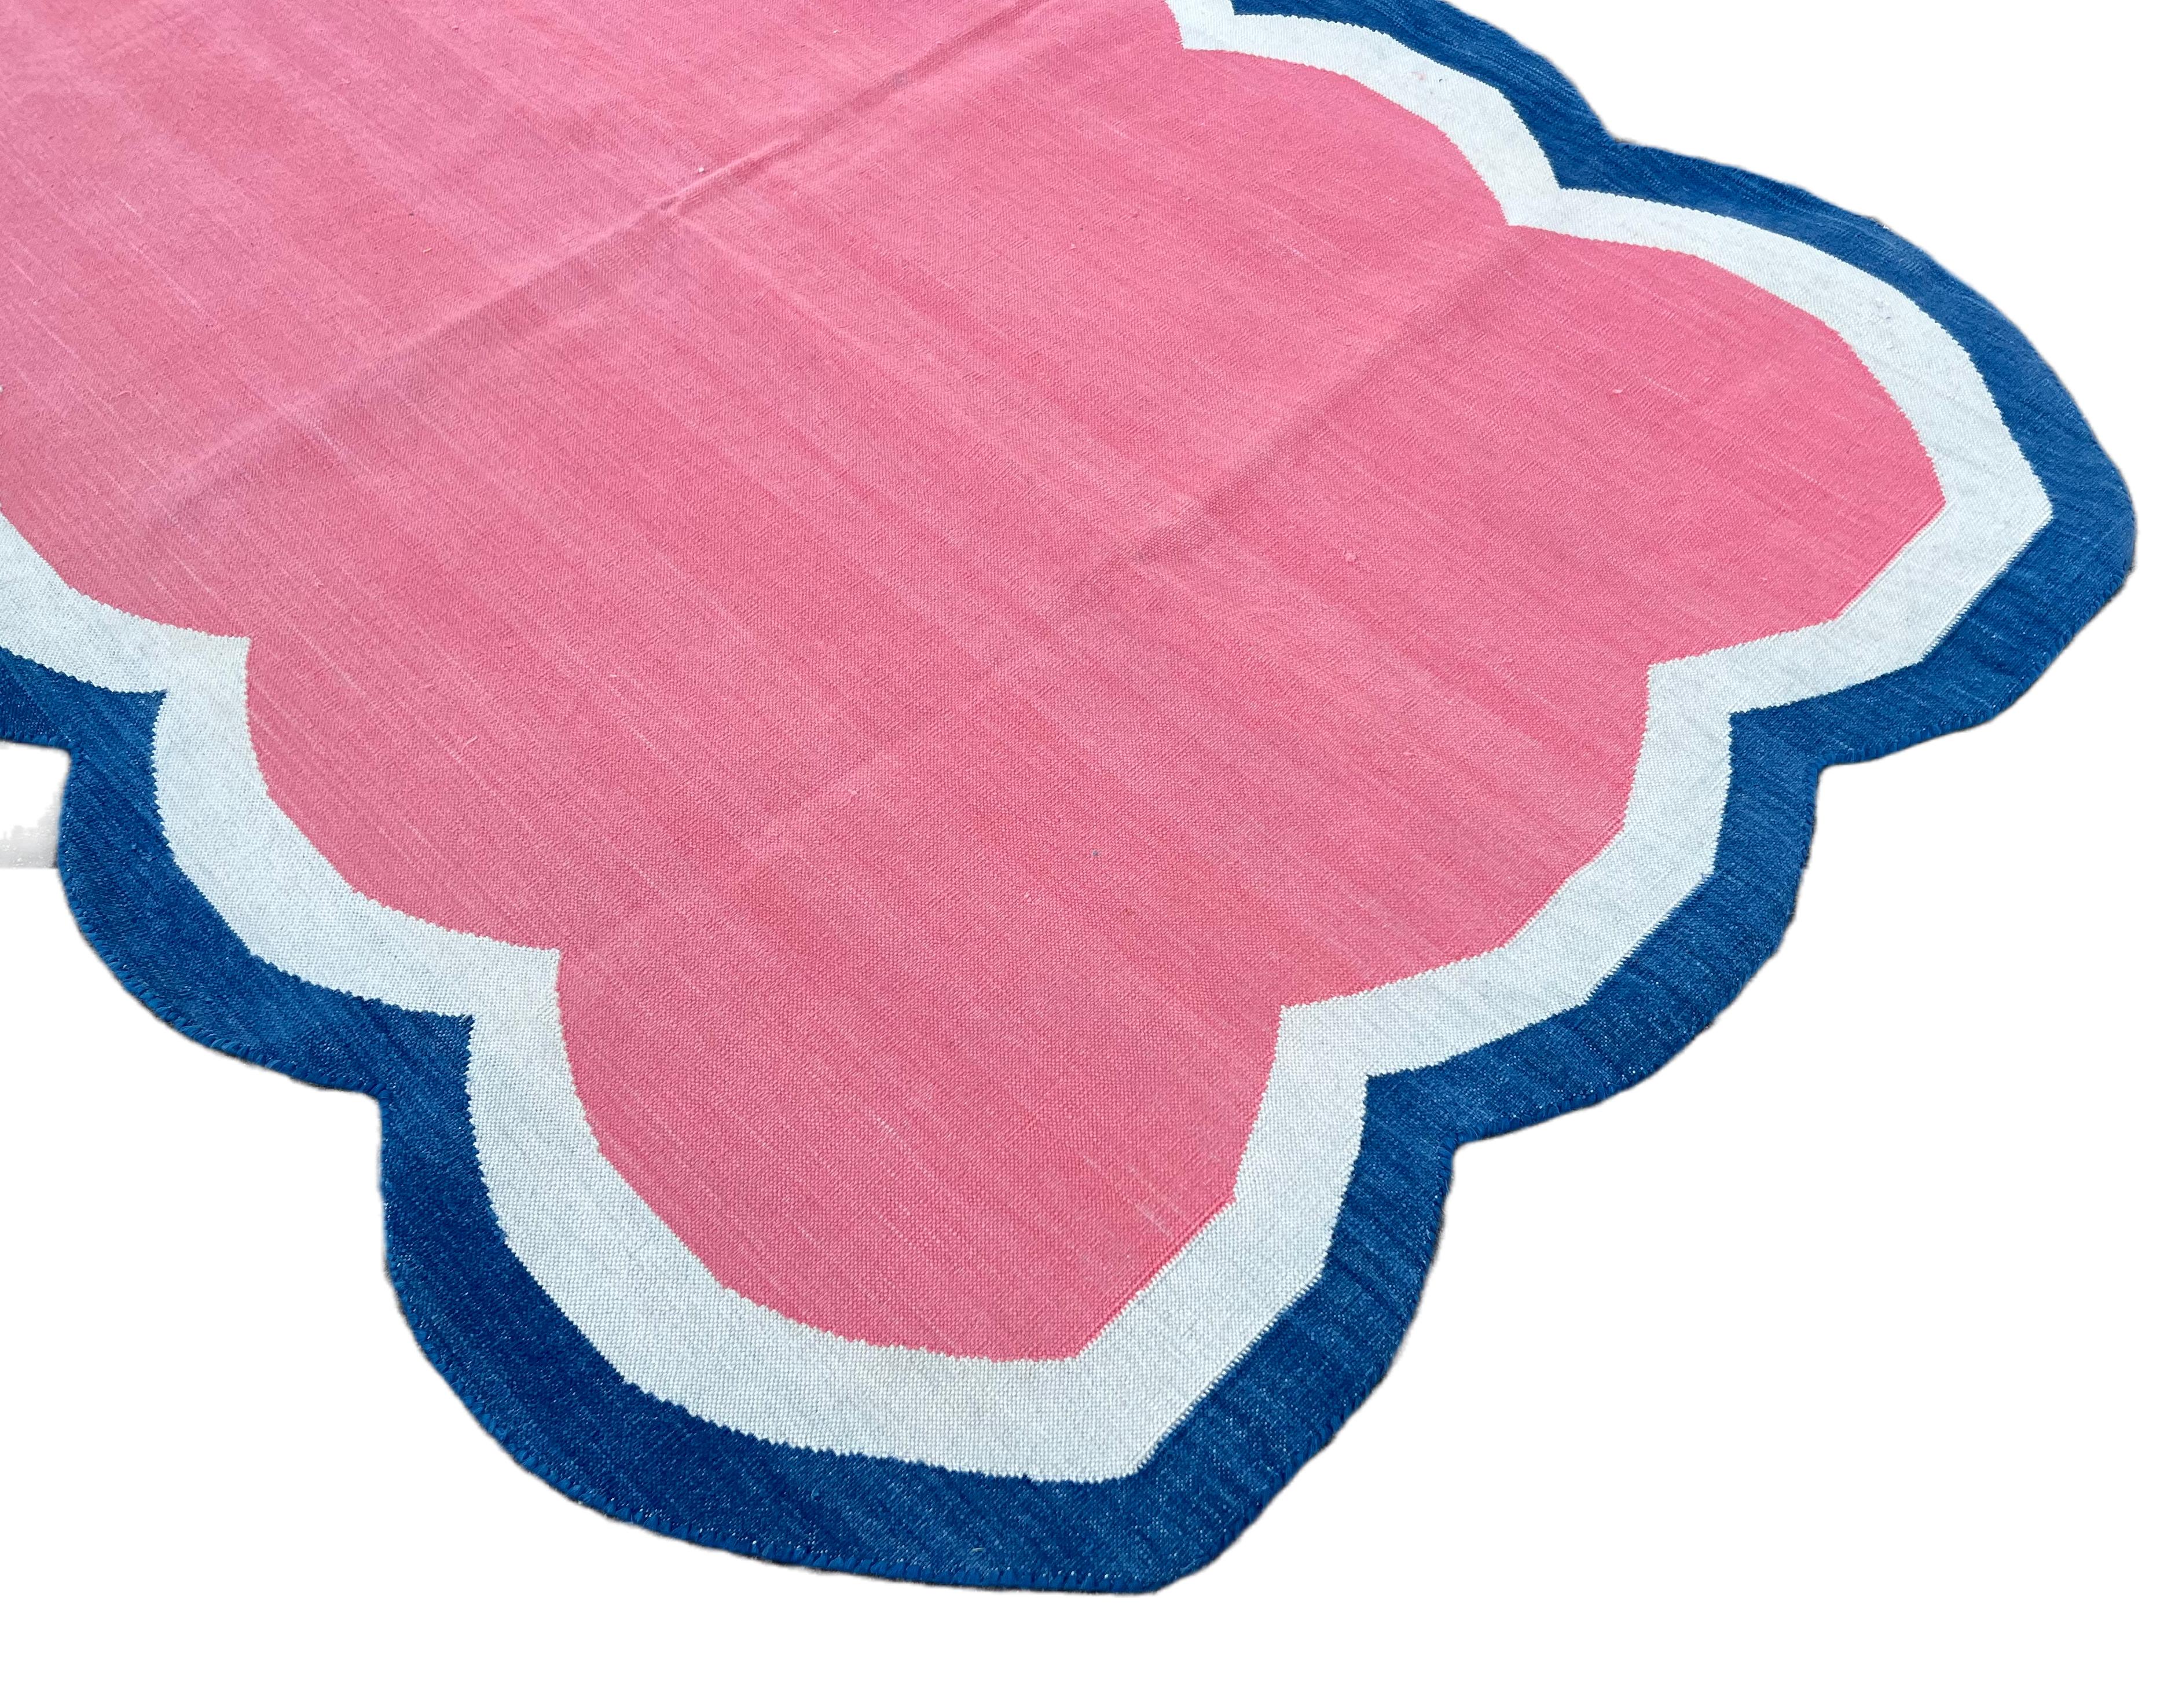 Indian Handmade Cotton Area Flat Weave Rug, 3x5 Pink And Blue Scalloped Kilim Dhurrie For Sale